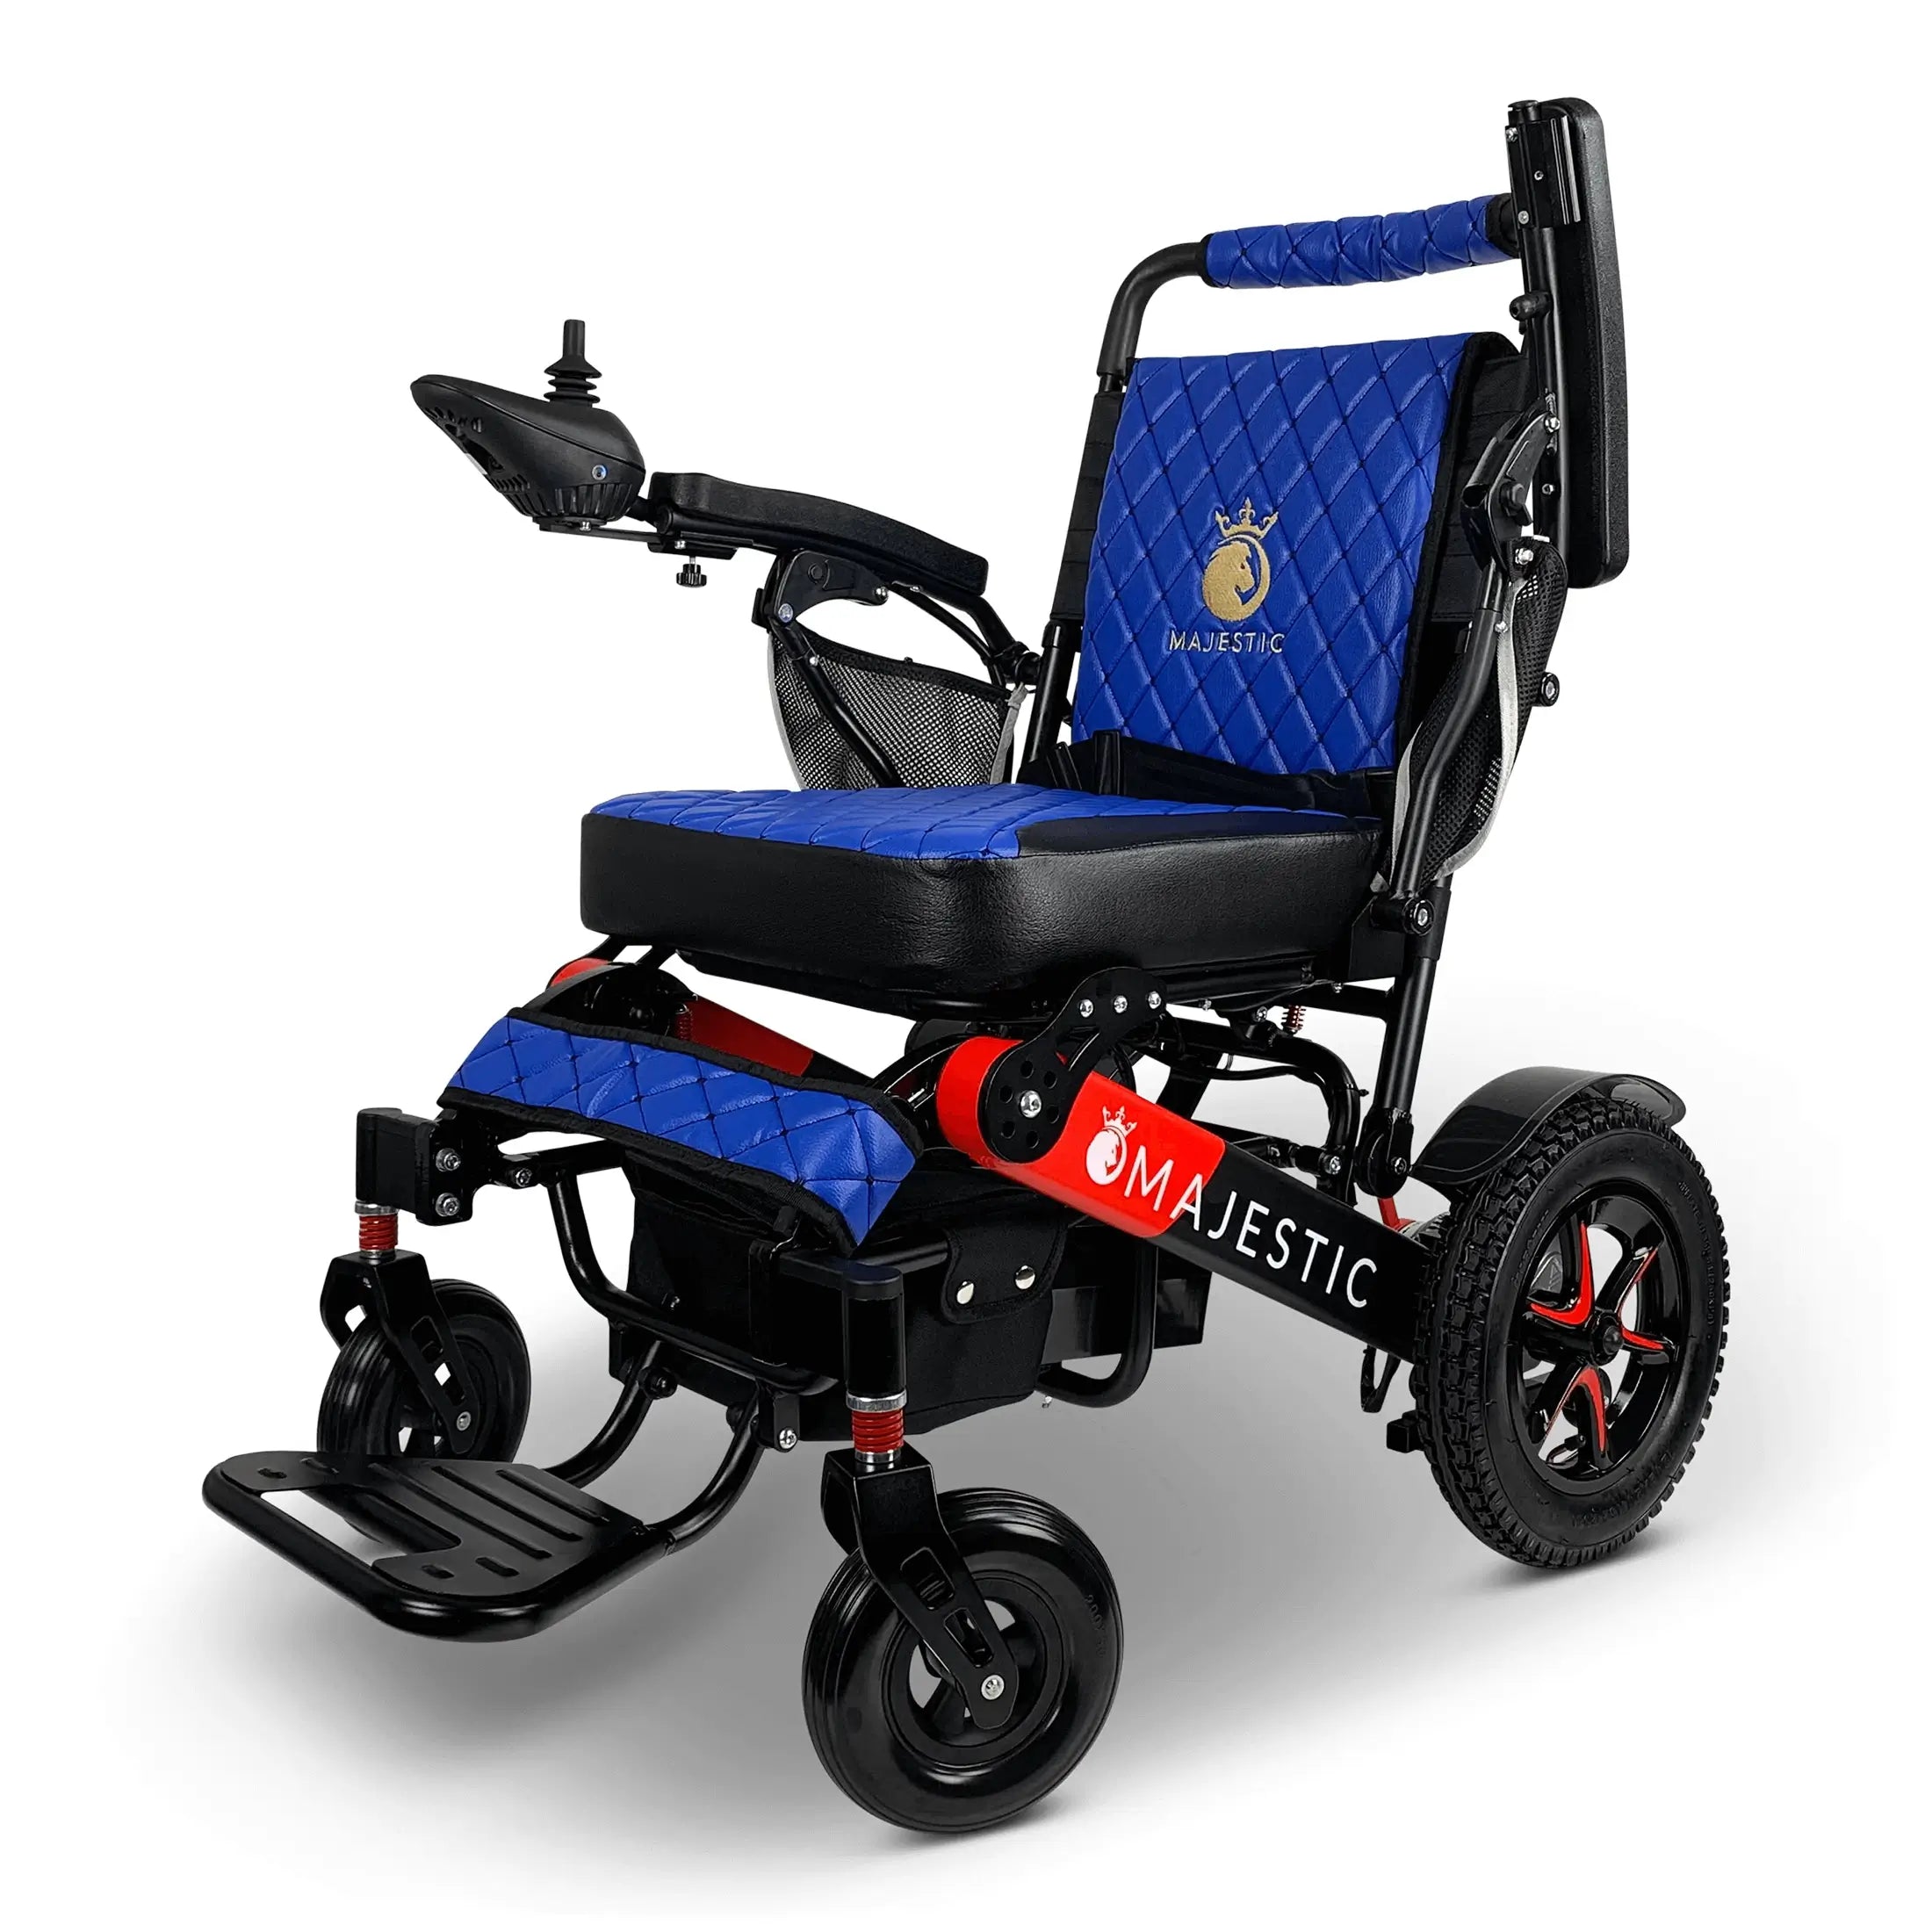 ComfyGo Majestic IQ-7000 AF Auto Folding Remote Controlled Electric Wheelchair Electric Wheelchair ComfyGo Black & Red Blue Up To 13 Miles - 12AH Battery